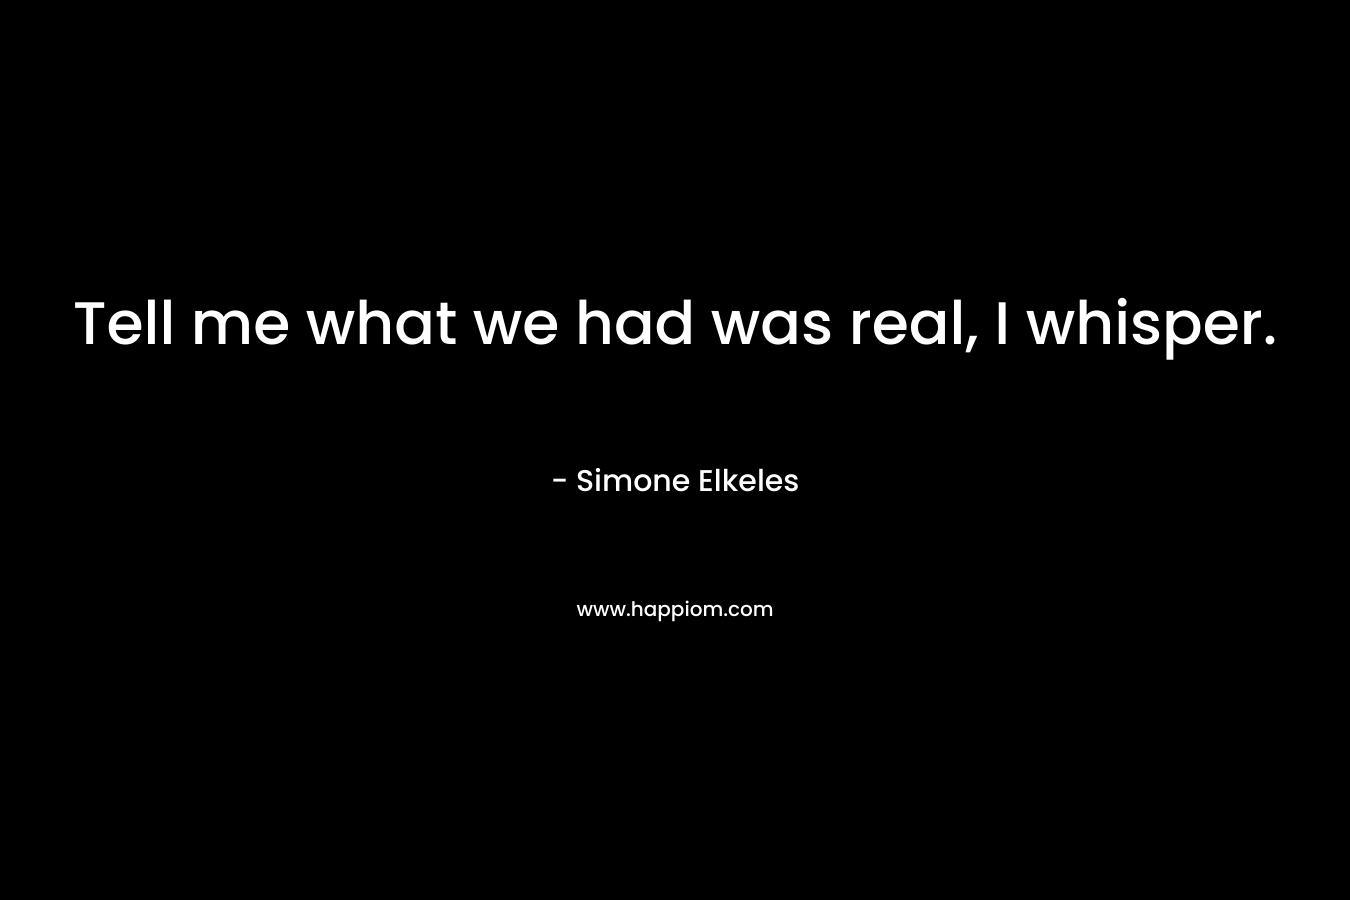 Tell me what we had was real, I whisper. – Simone Elkeles